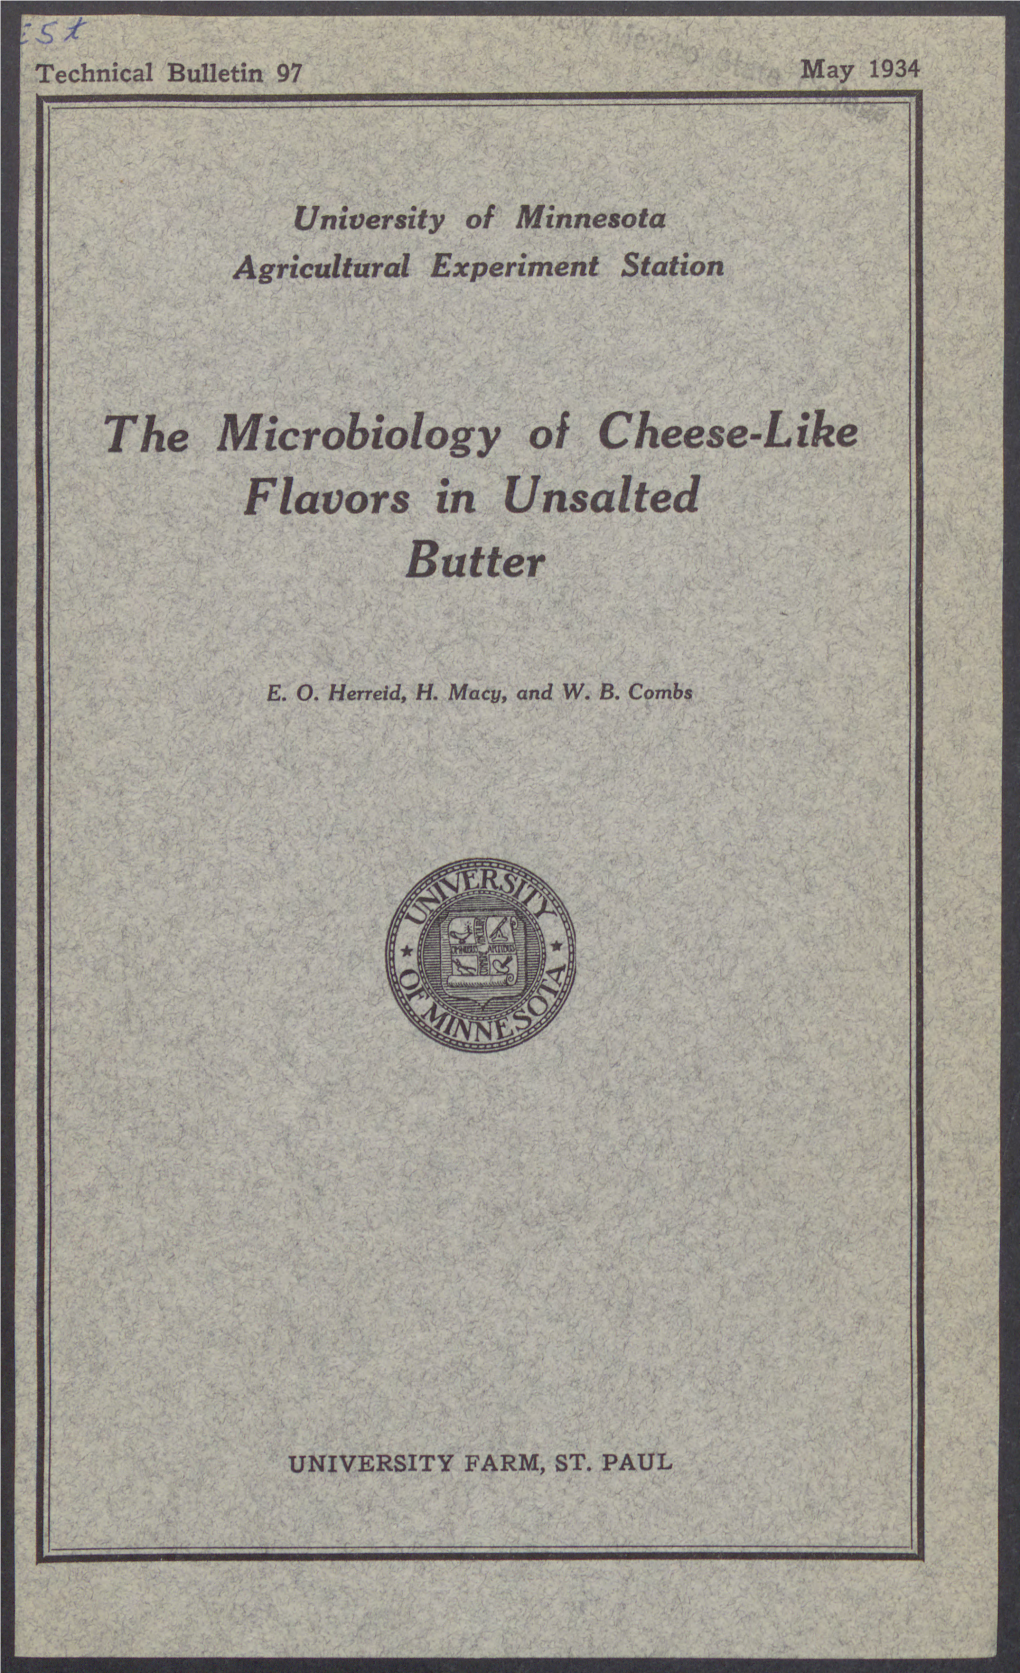 The Microbiology of Cheese-Like Flavors in Unsalted Butter